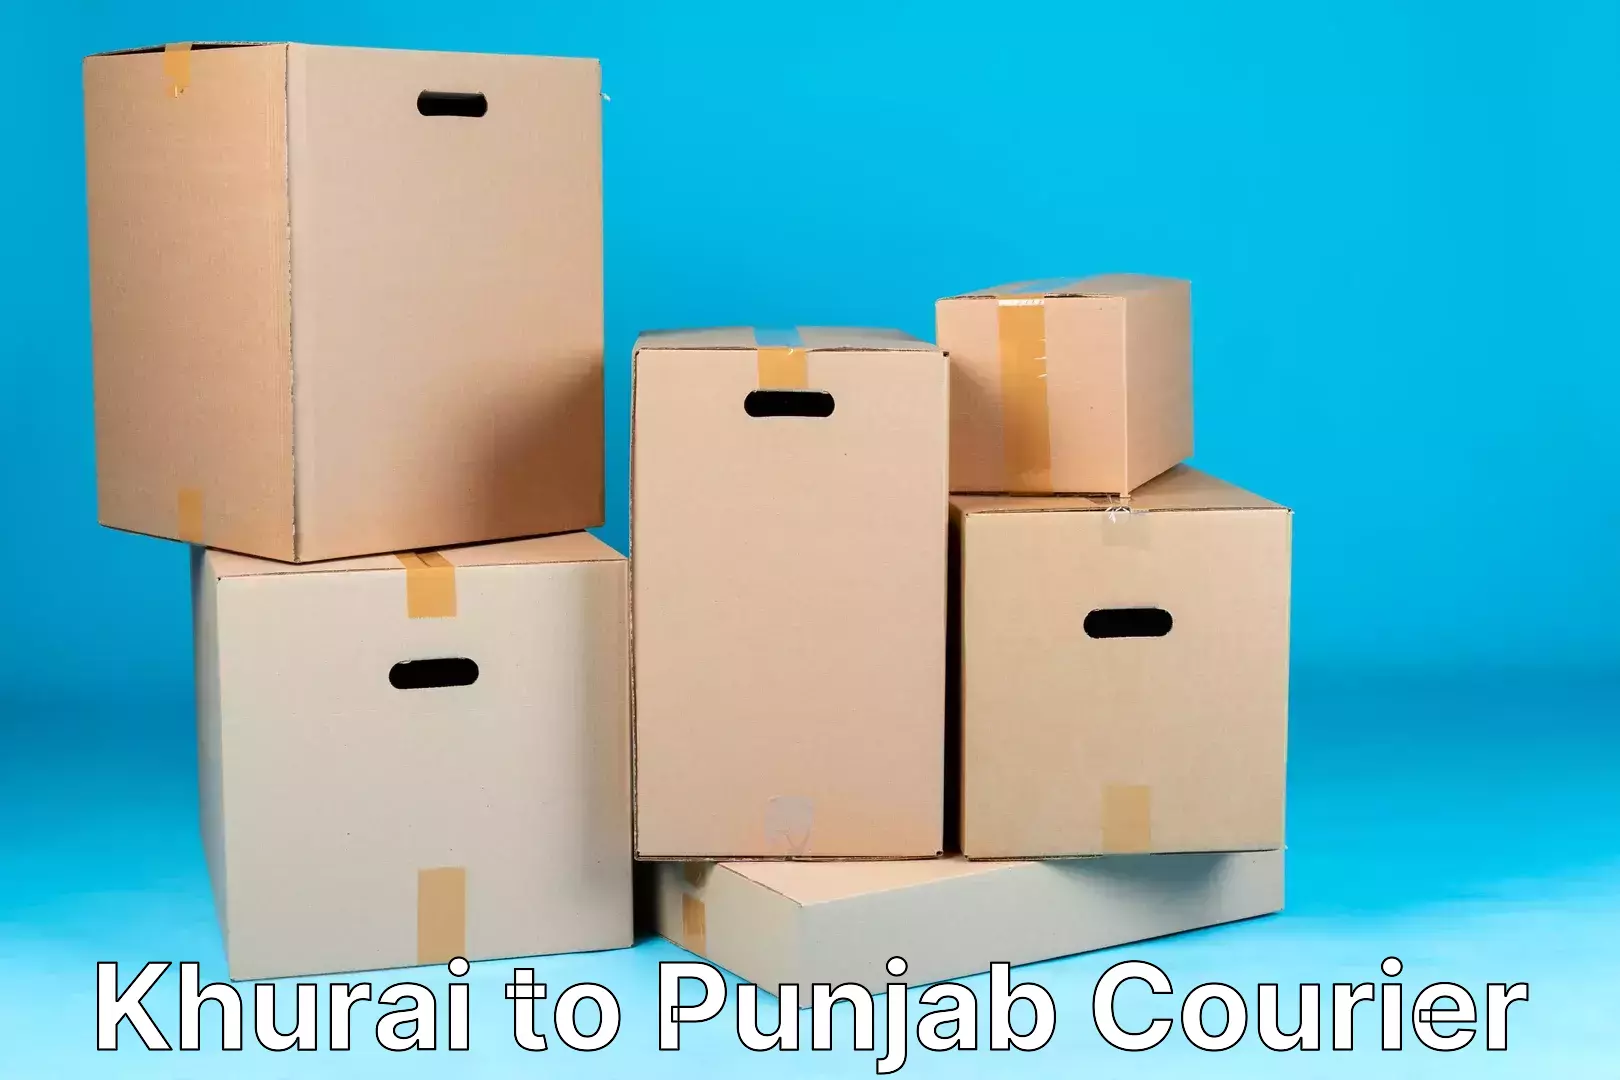 Flexible delivery scheduling Khurai to Punjab